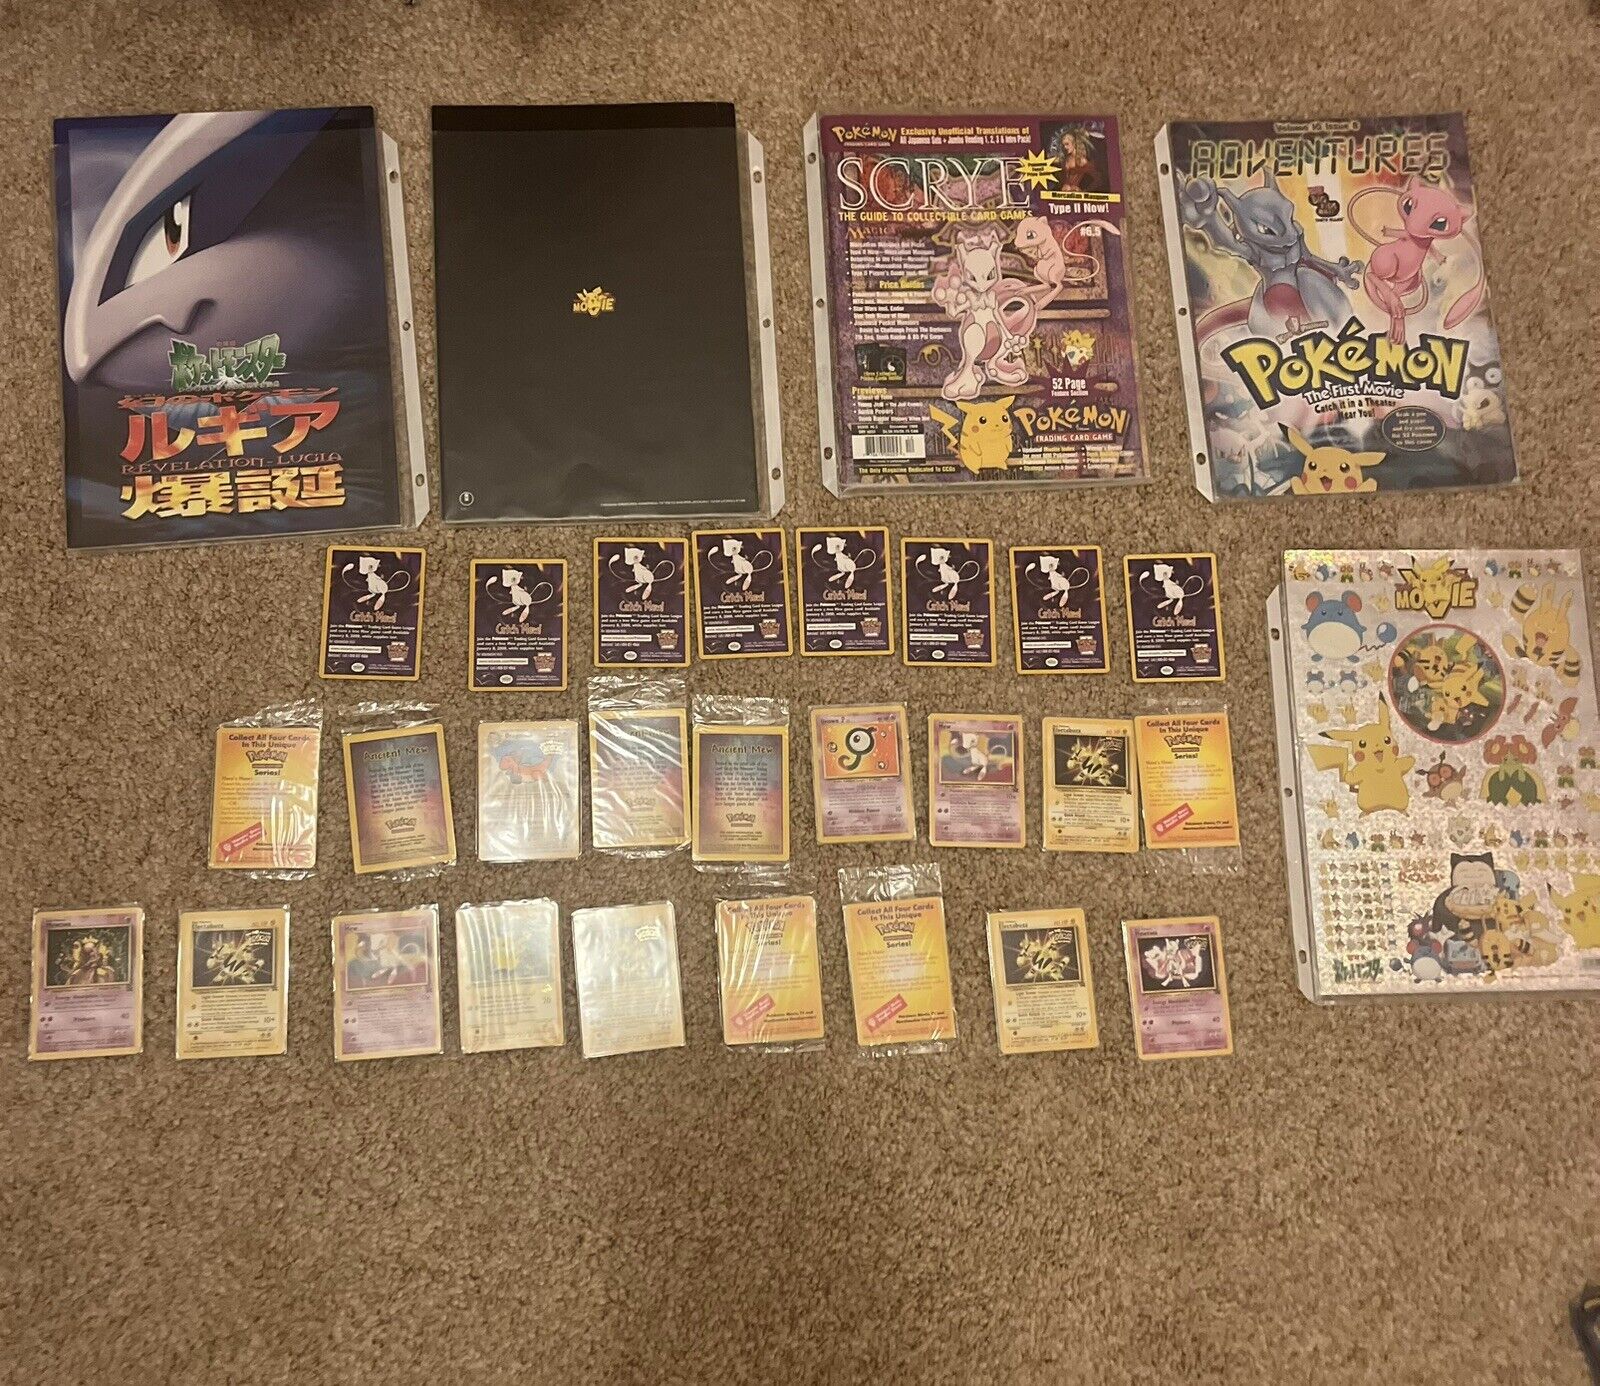 Ultimate Pokémon “The Movie” Set From Pedigreed Collection—Mint